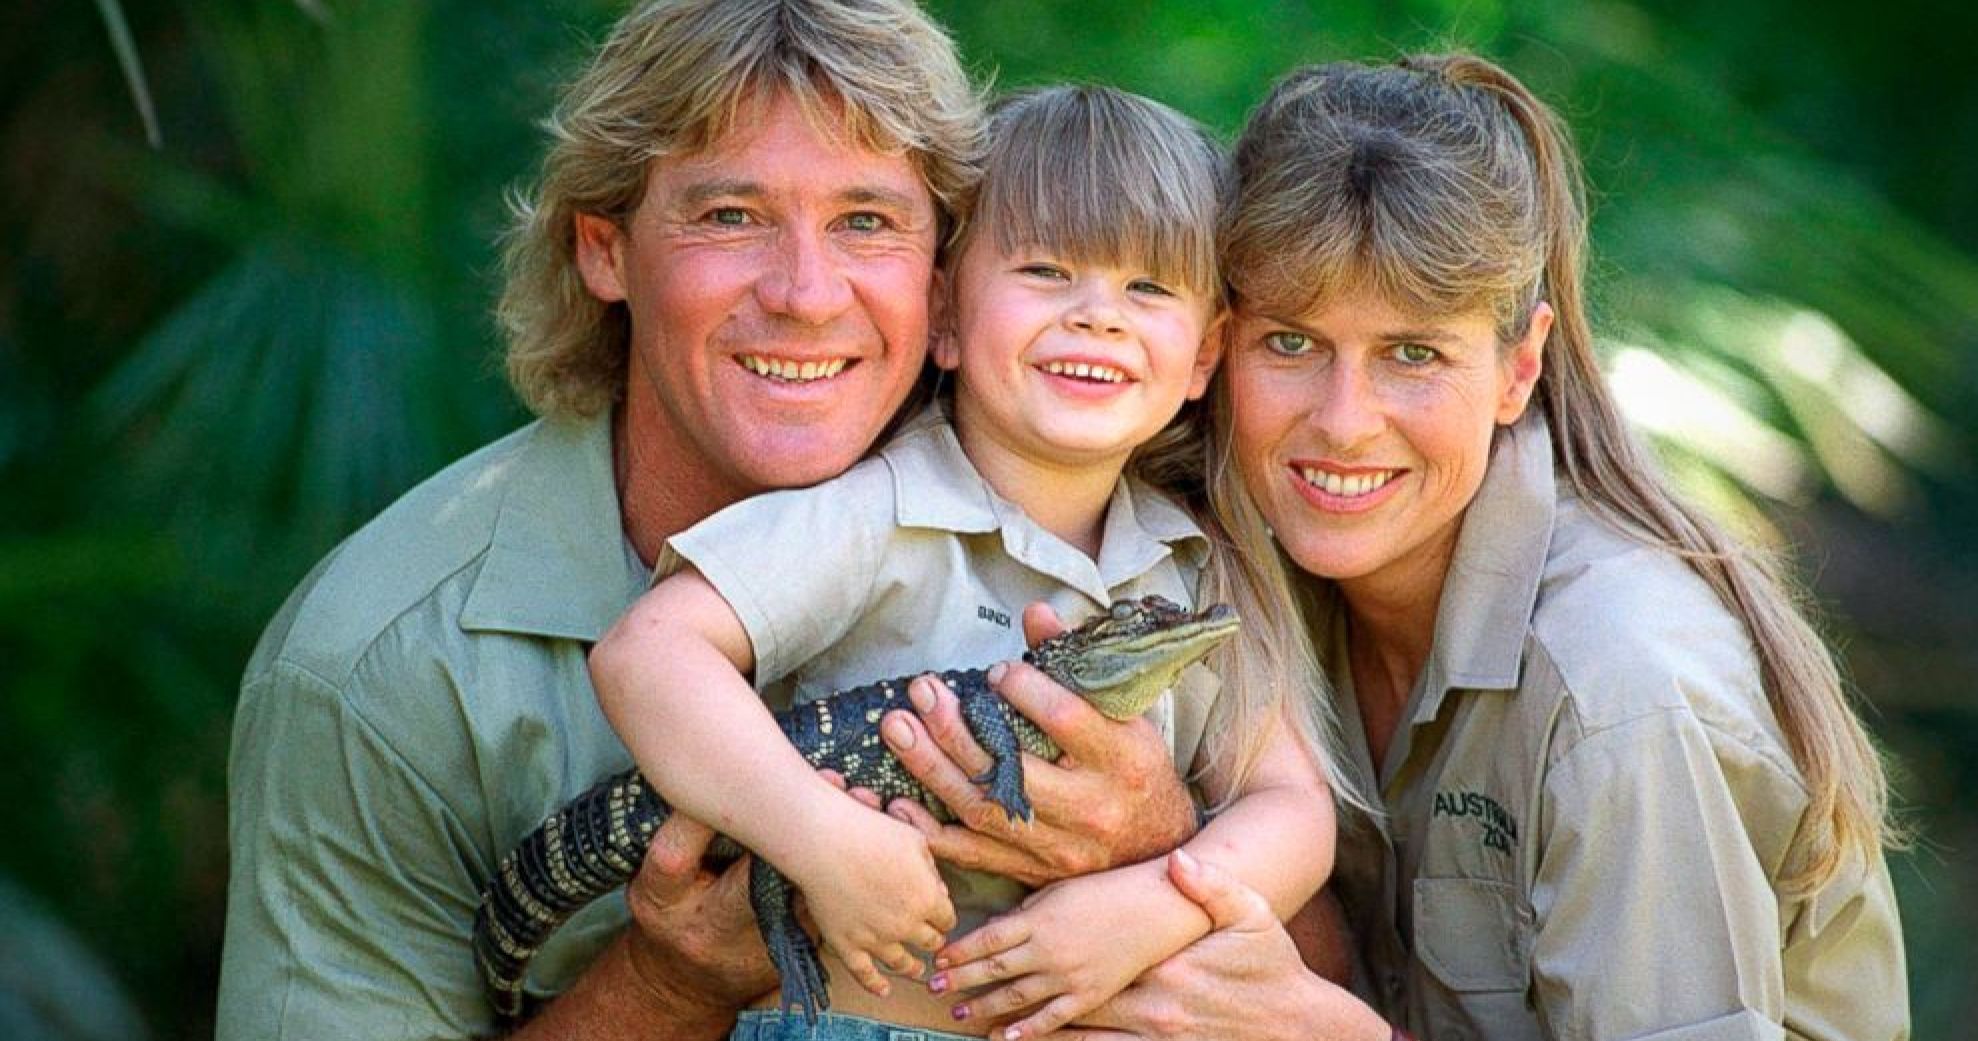 Steve Irwin's Family Says the Crocodile Hunter Would've Been the 'Perfect' Grandpa